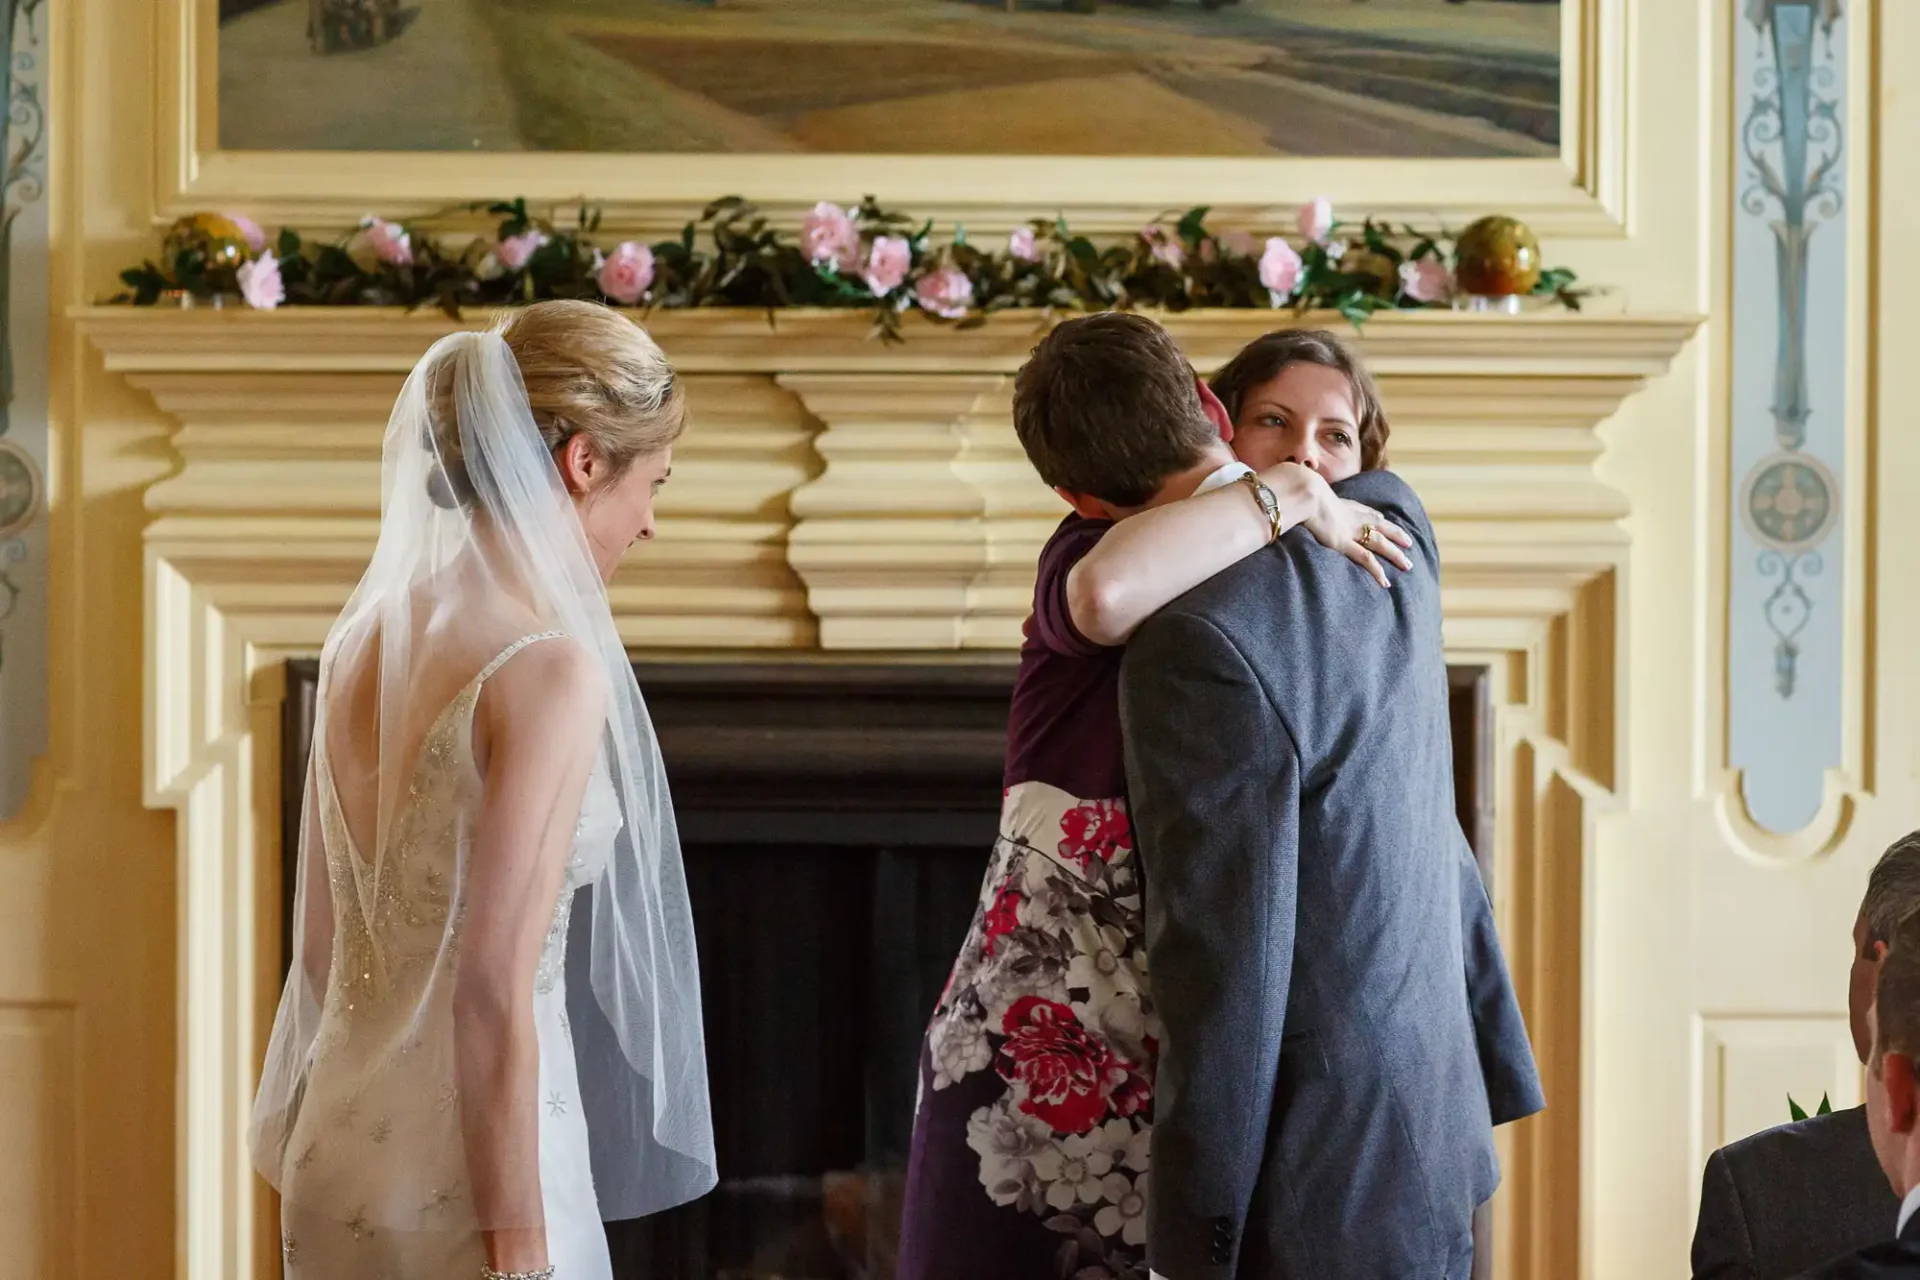 A bride watches as a wedding guest hugs another guest in front of a decorative fireplace adorned with flowers.